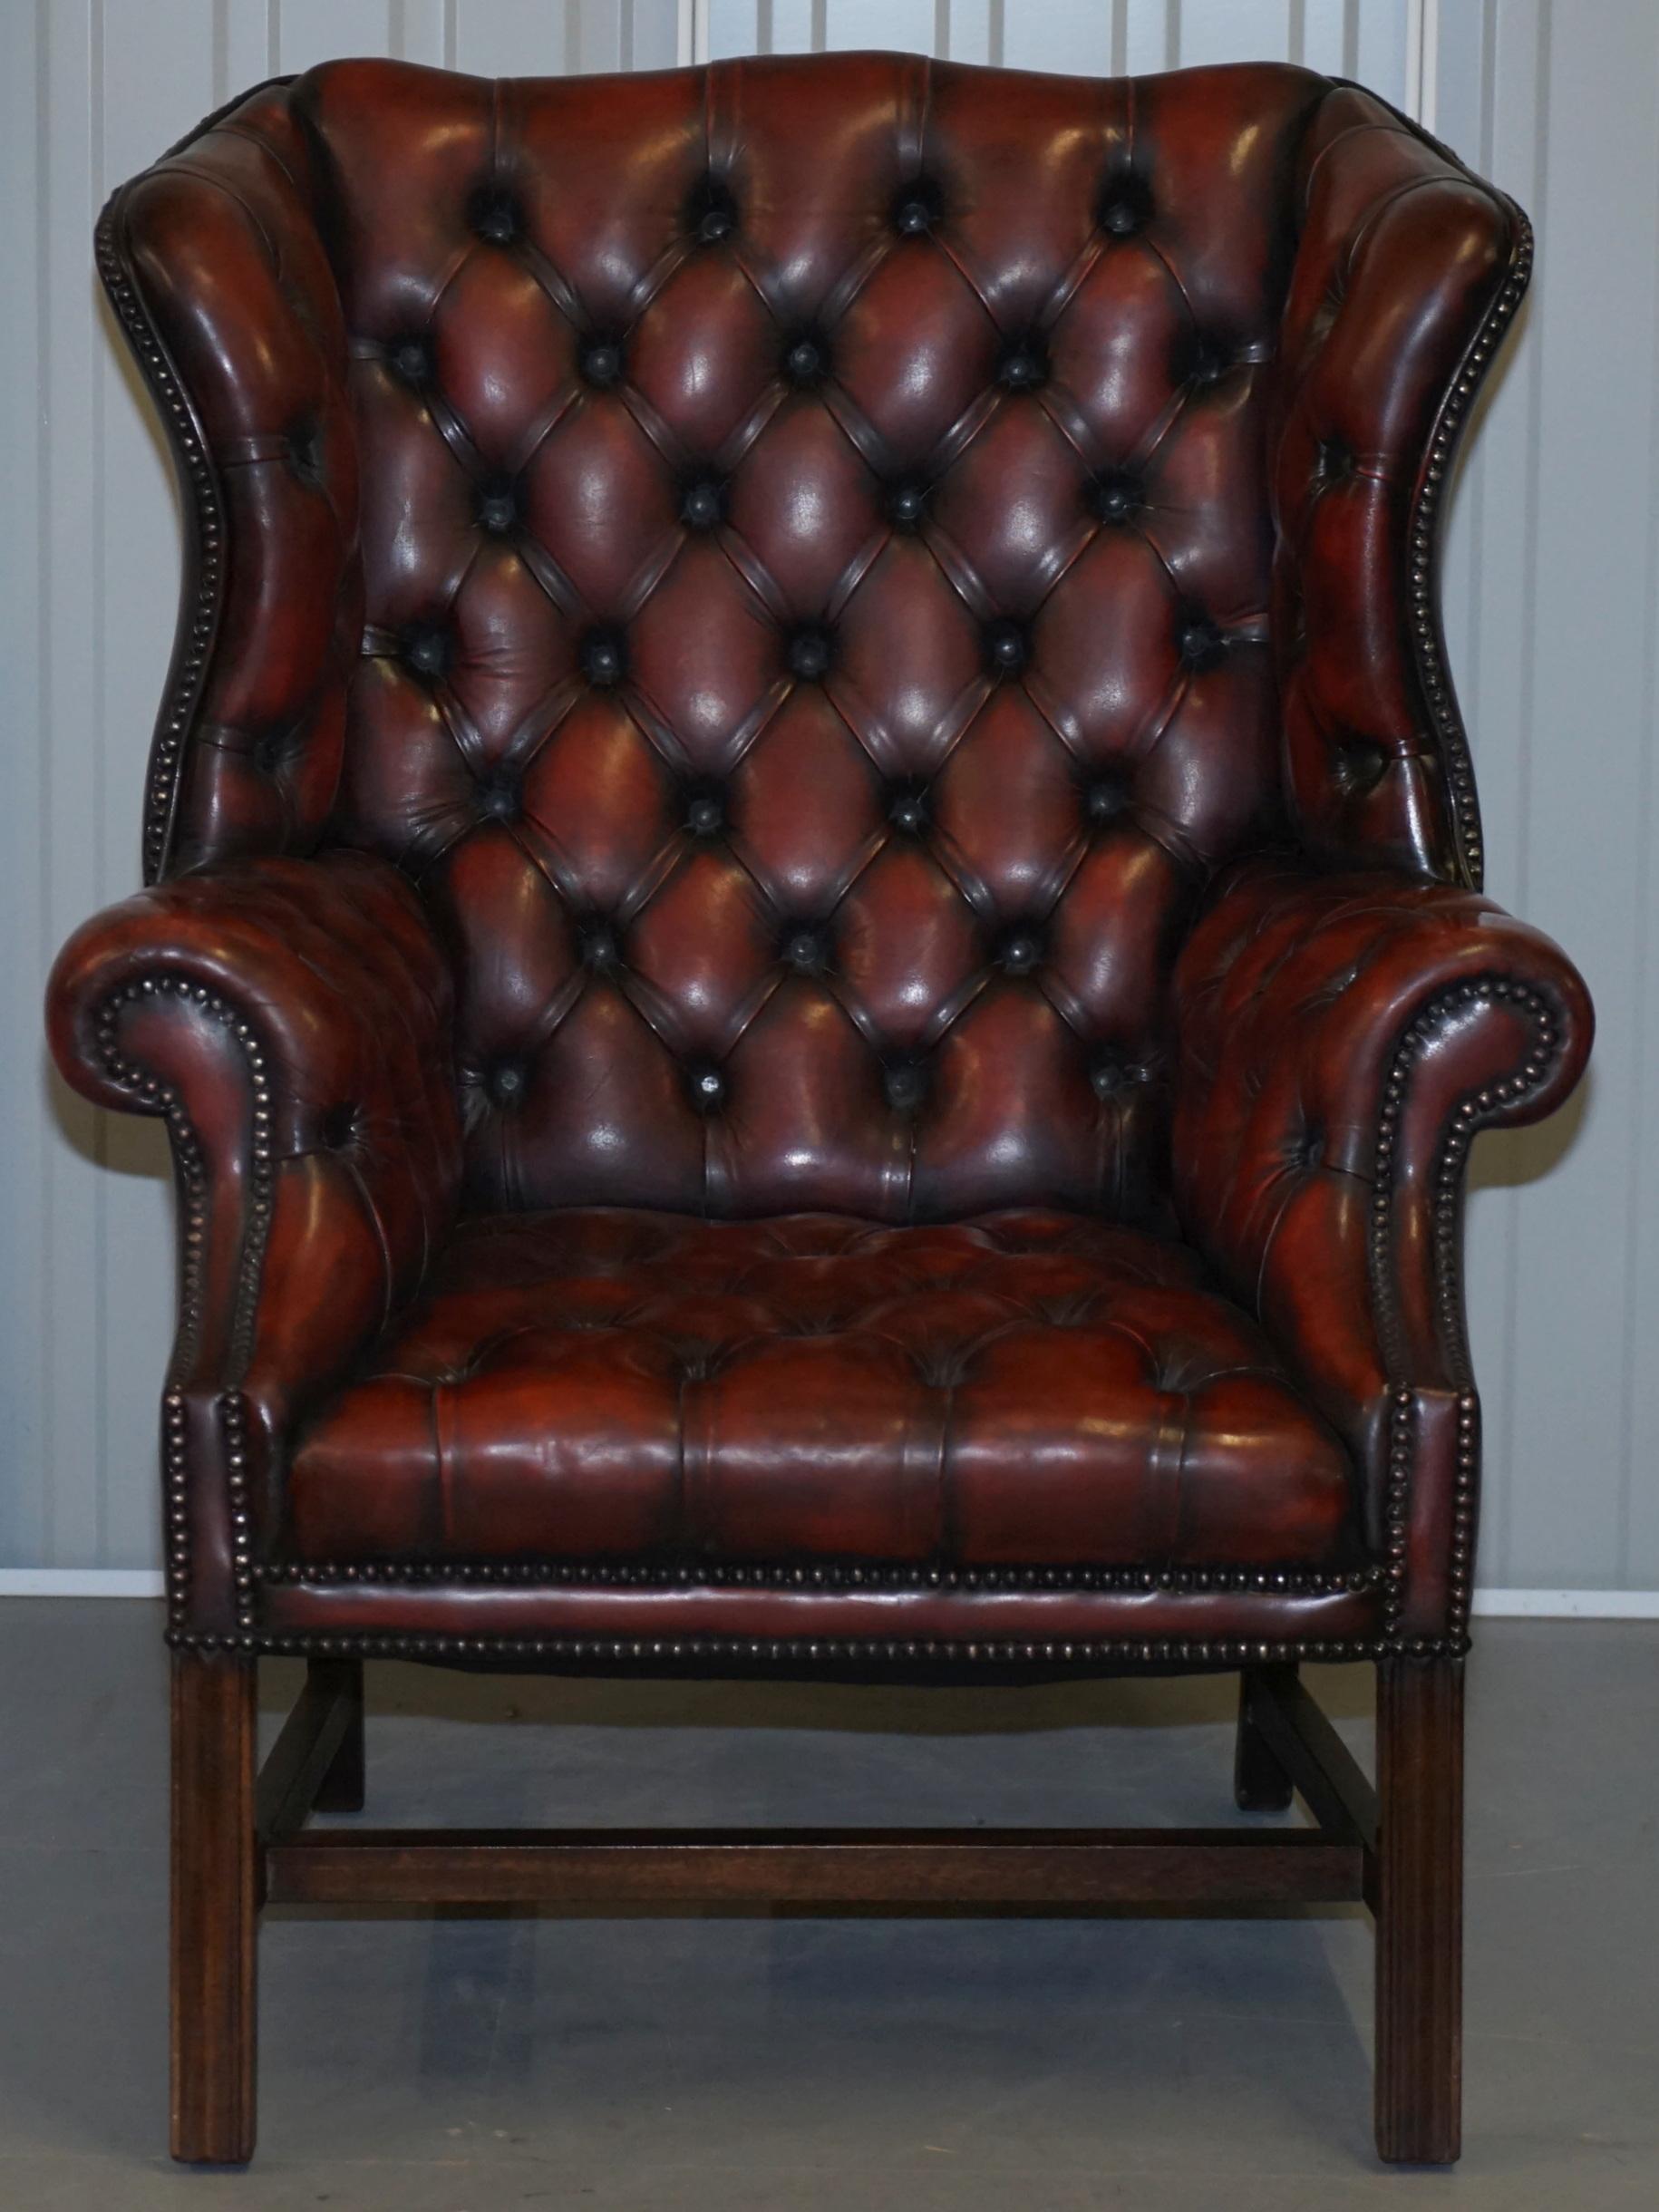 We are delighted to offer for sale this stunning fully restored vintage chesterfield tufted oxblood leather wingback armchair

This chair is a real tour de force, it has absolutely everything going for it, the leather hide is original and hand